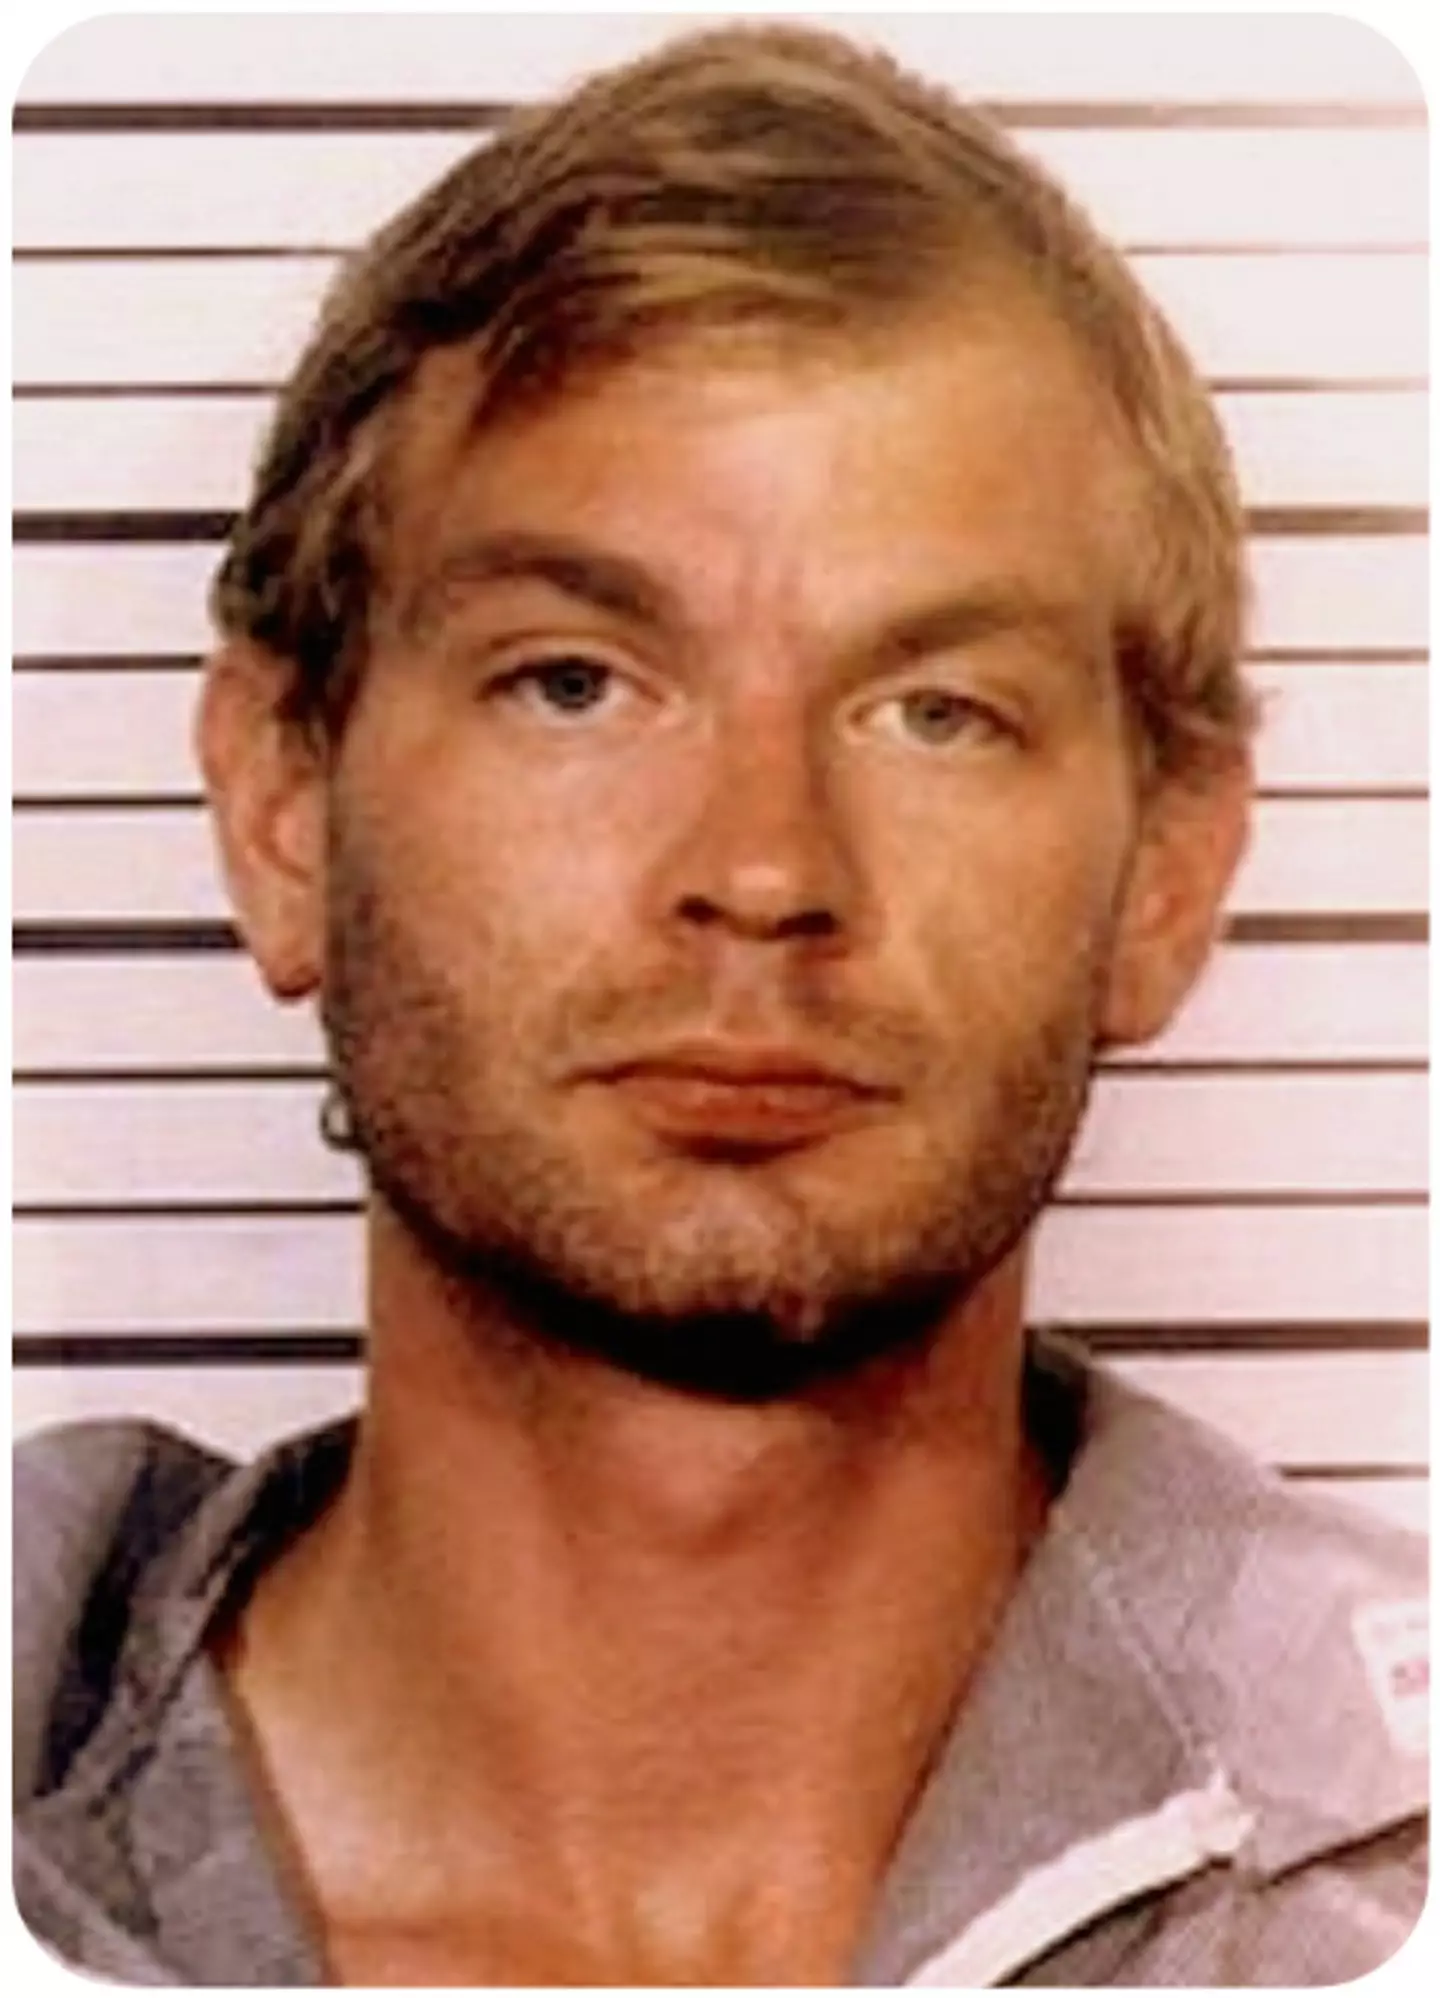 Jeffrey Dahmer murdered 17 men and boys during a spree spanning decades.